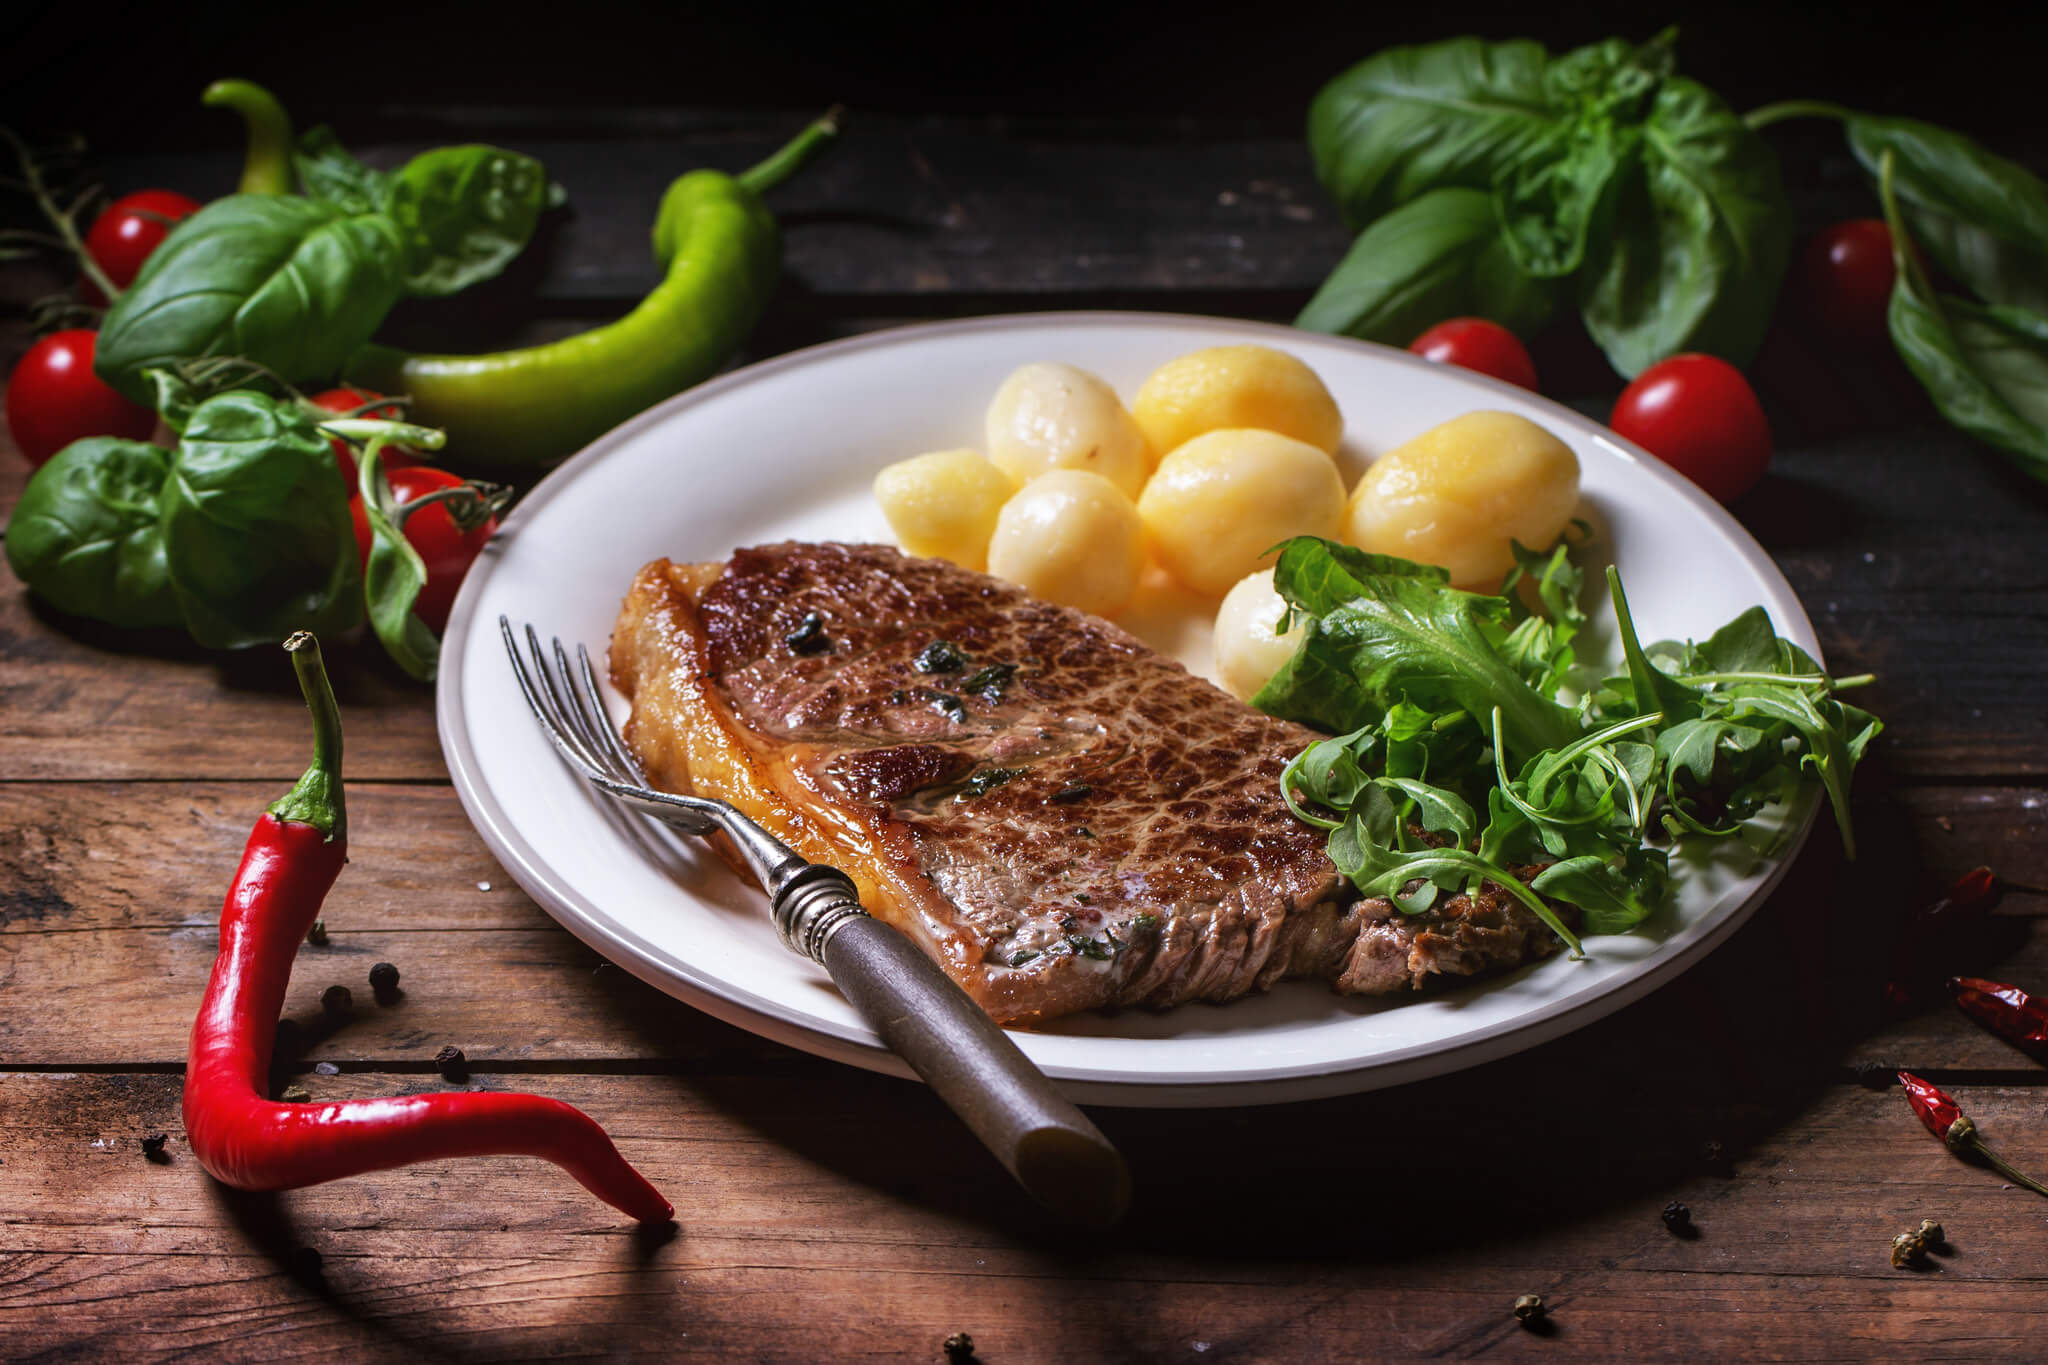 grilled-steak-with-potatoes-SBI-300743913